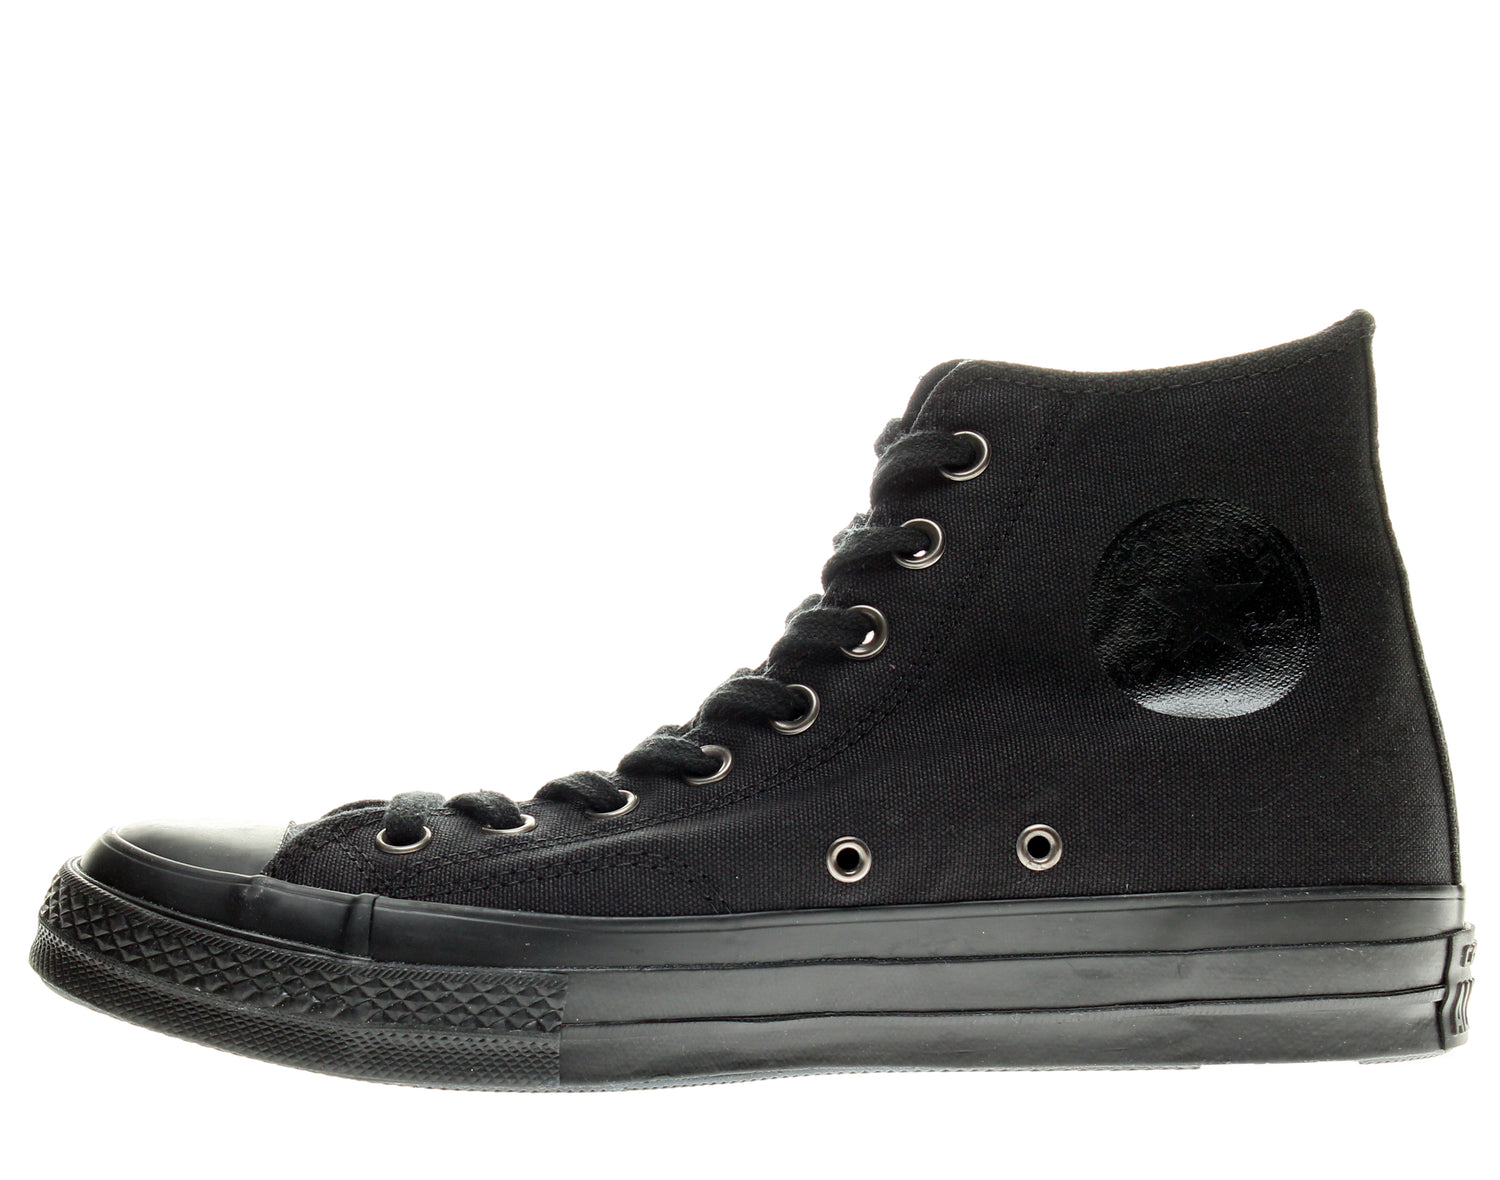 Converse Chuck Taylor All Star '70 High Top Sneakers